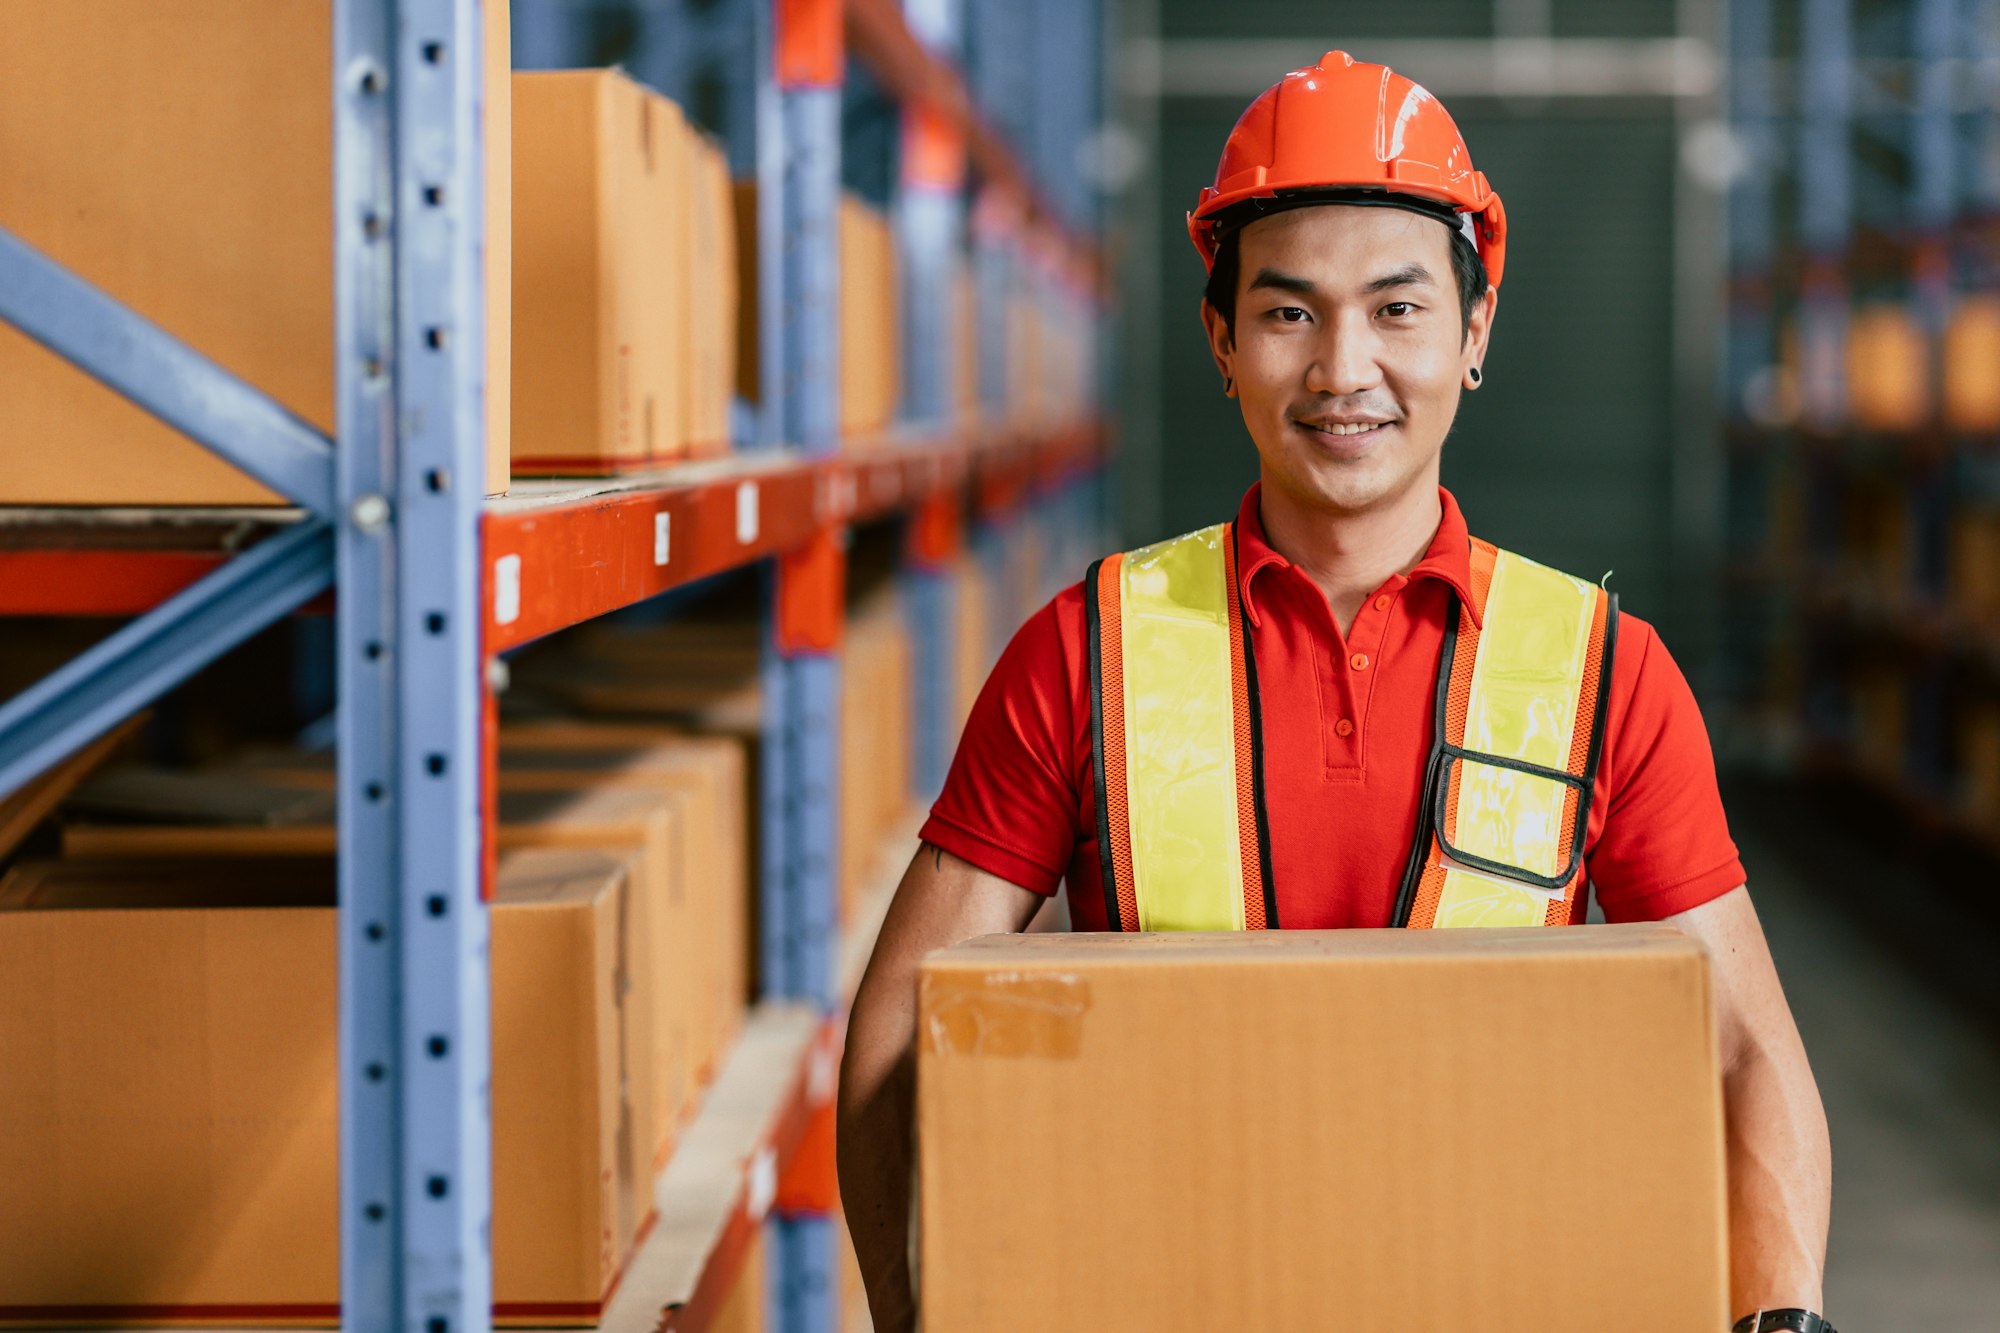 Warehouse staff worker at cargo inventory handle goods products box portrait happy smiling